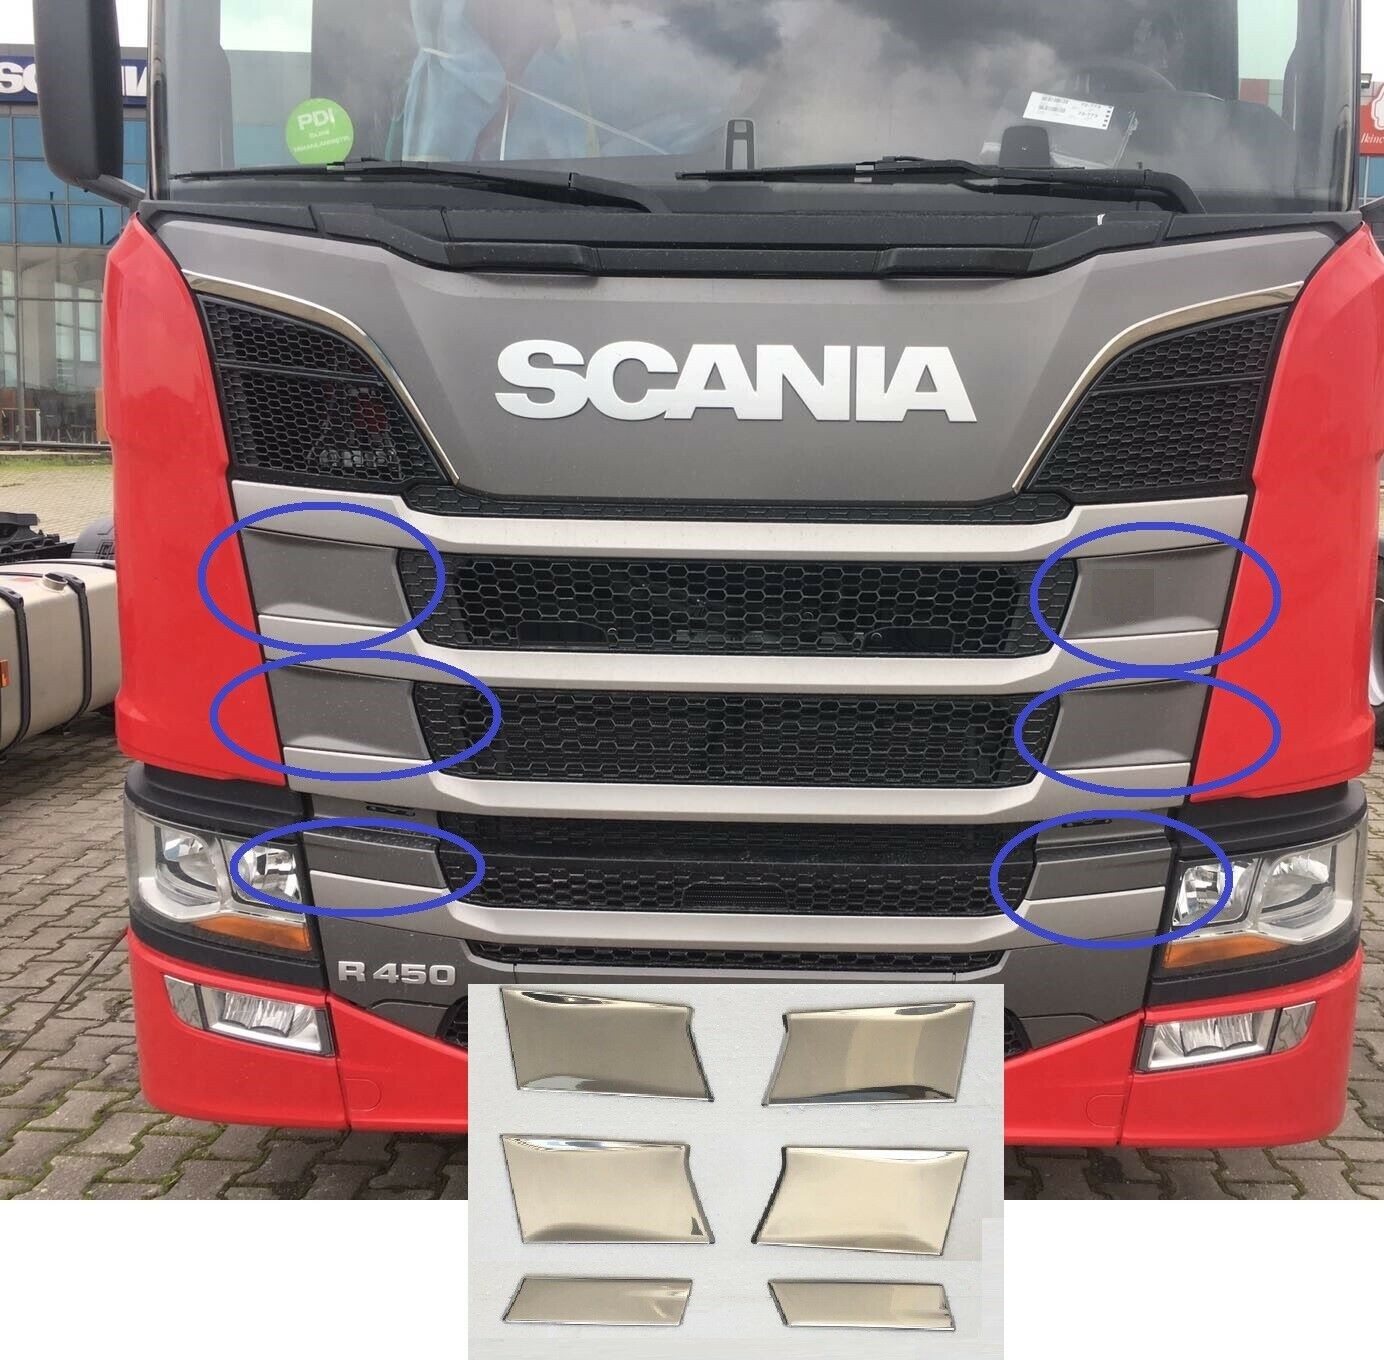 SCANIA S SERIES CHROME GRILL EDGE 8 Pcs. 2017+  STAINLESS STEEL